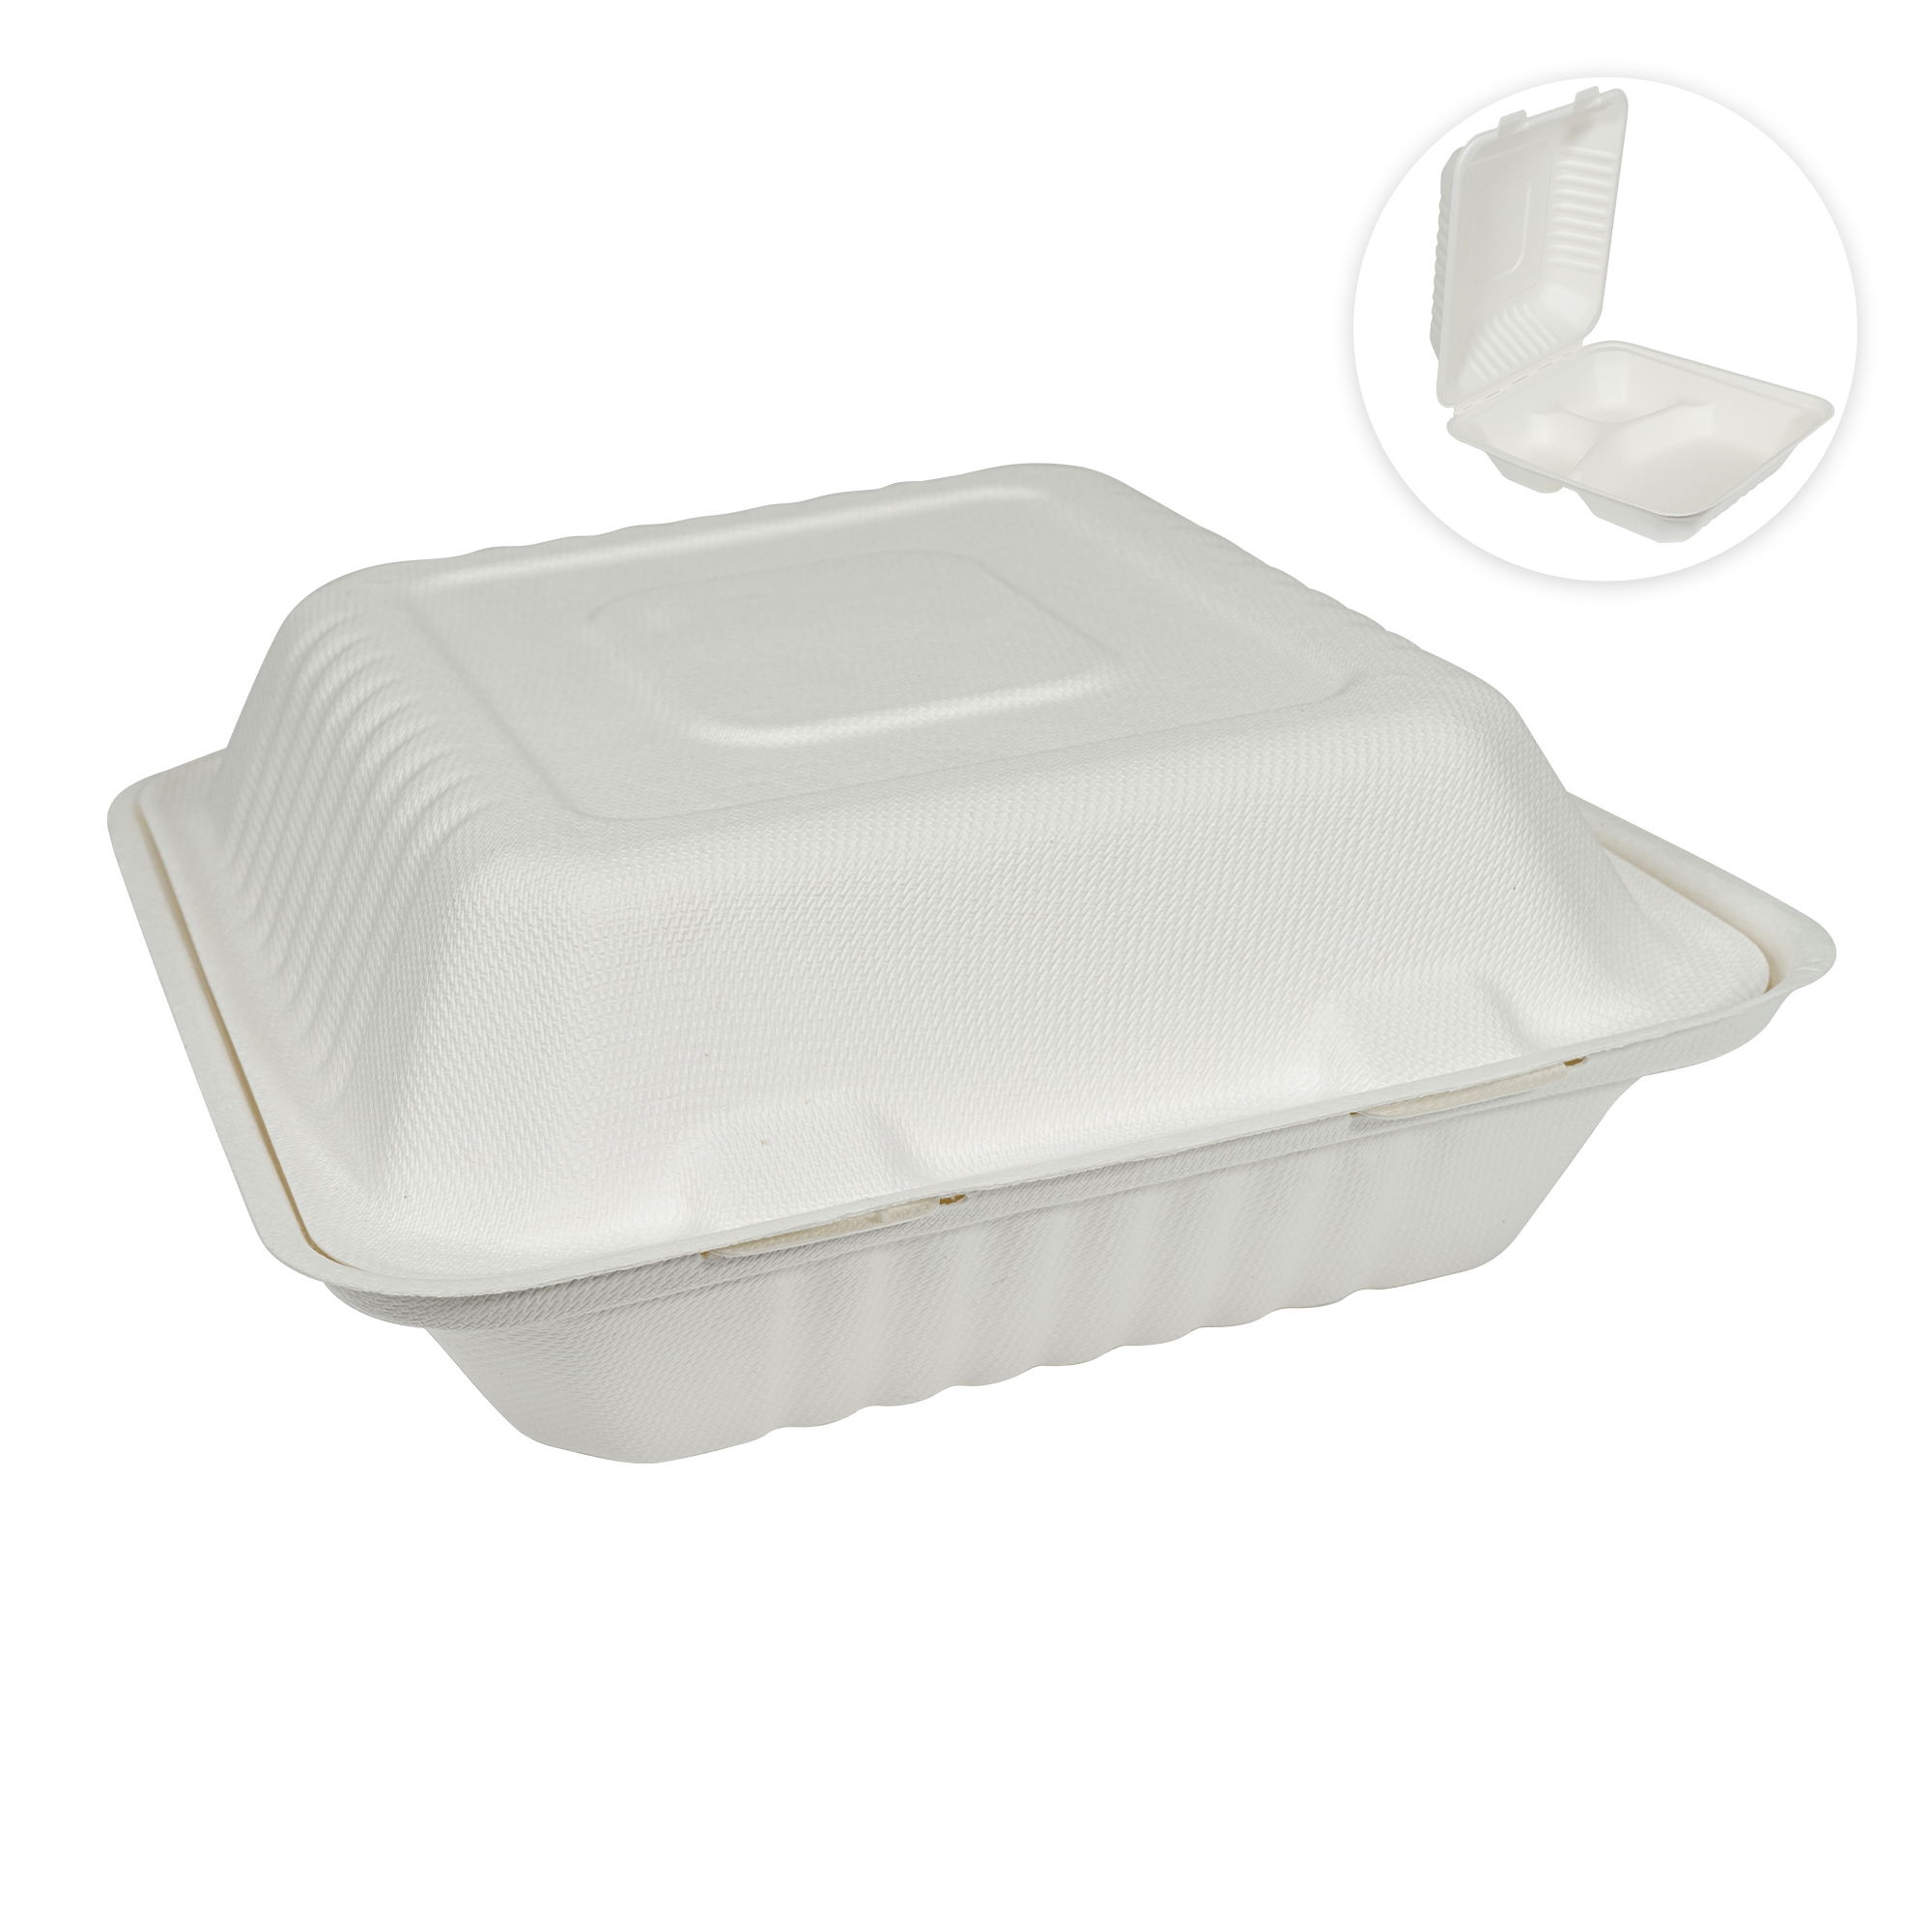 Square 3-Compartment Compostable Fiber Hinged Container 9" 50pc/pack - White